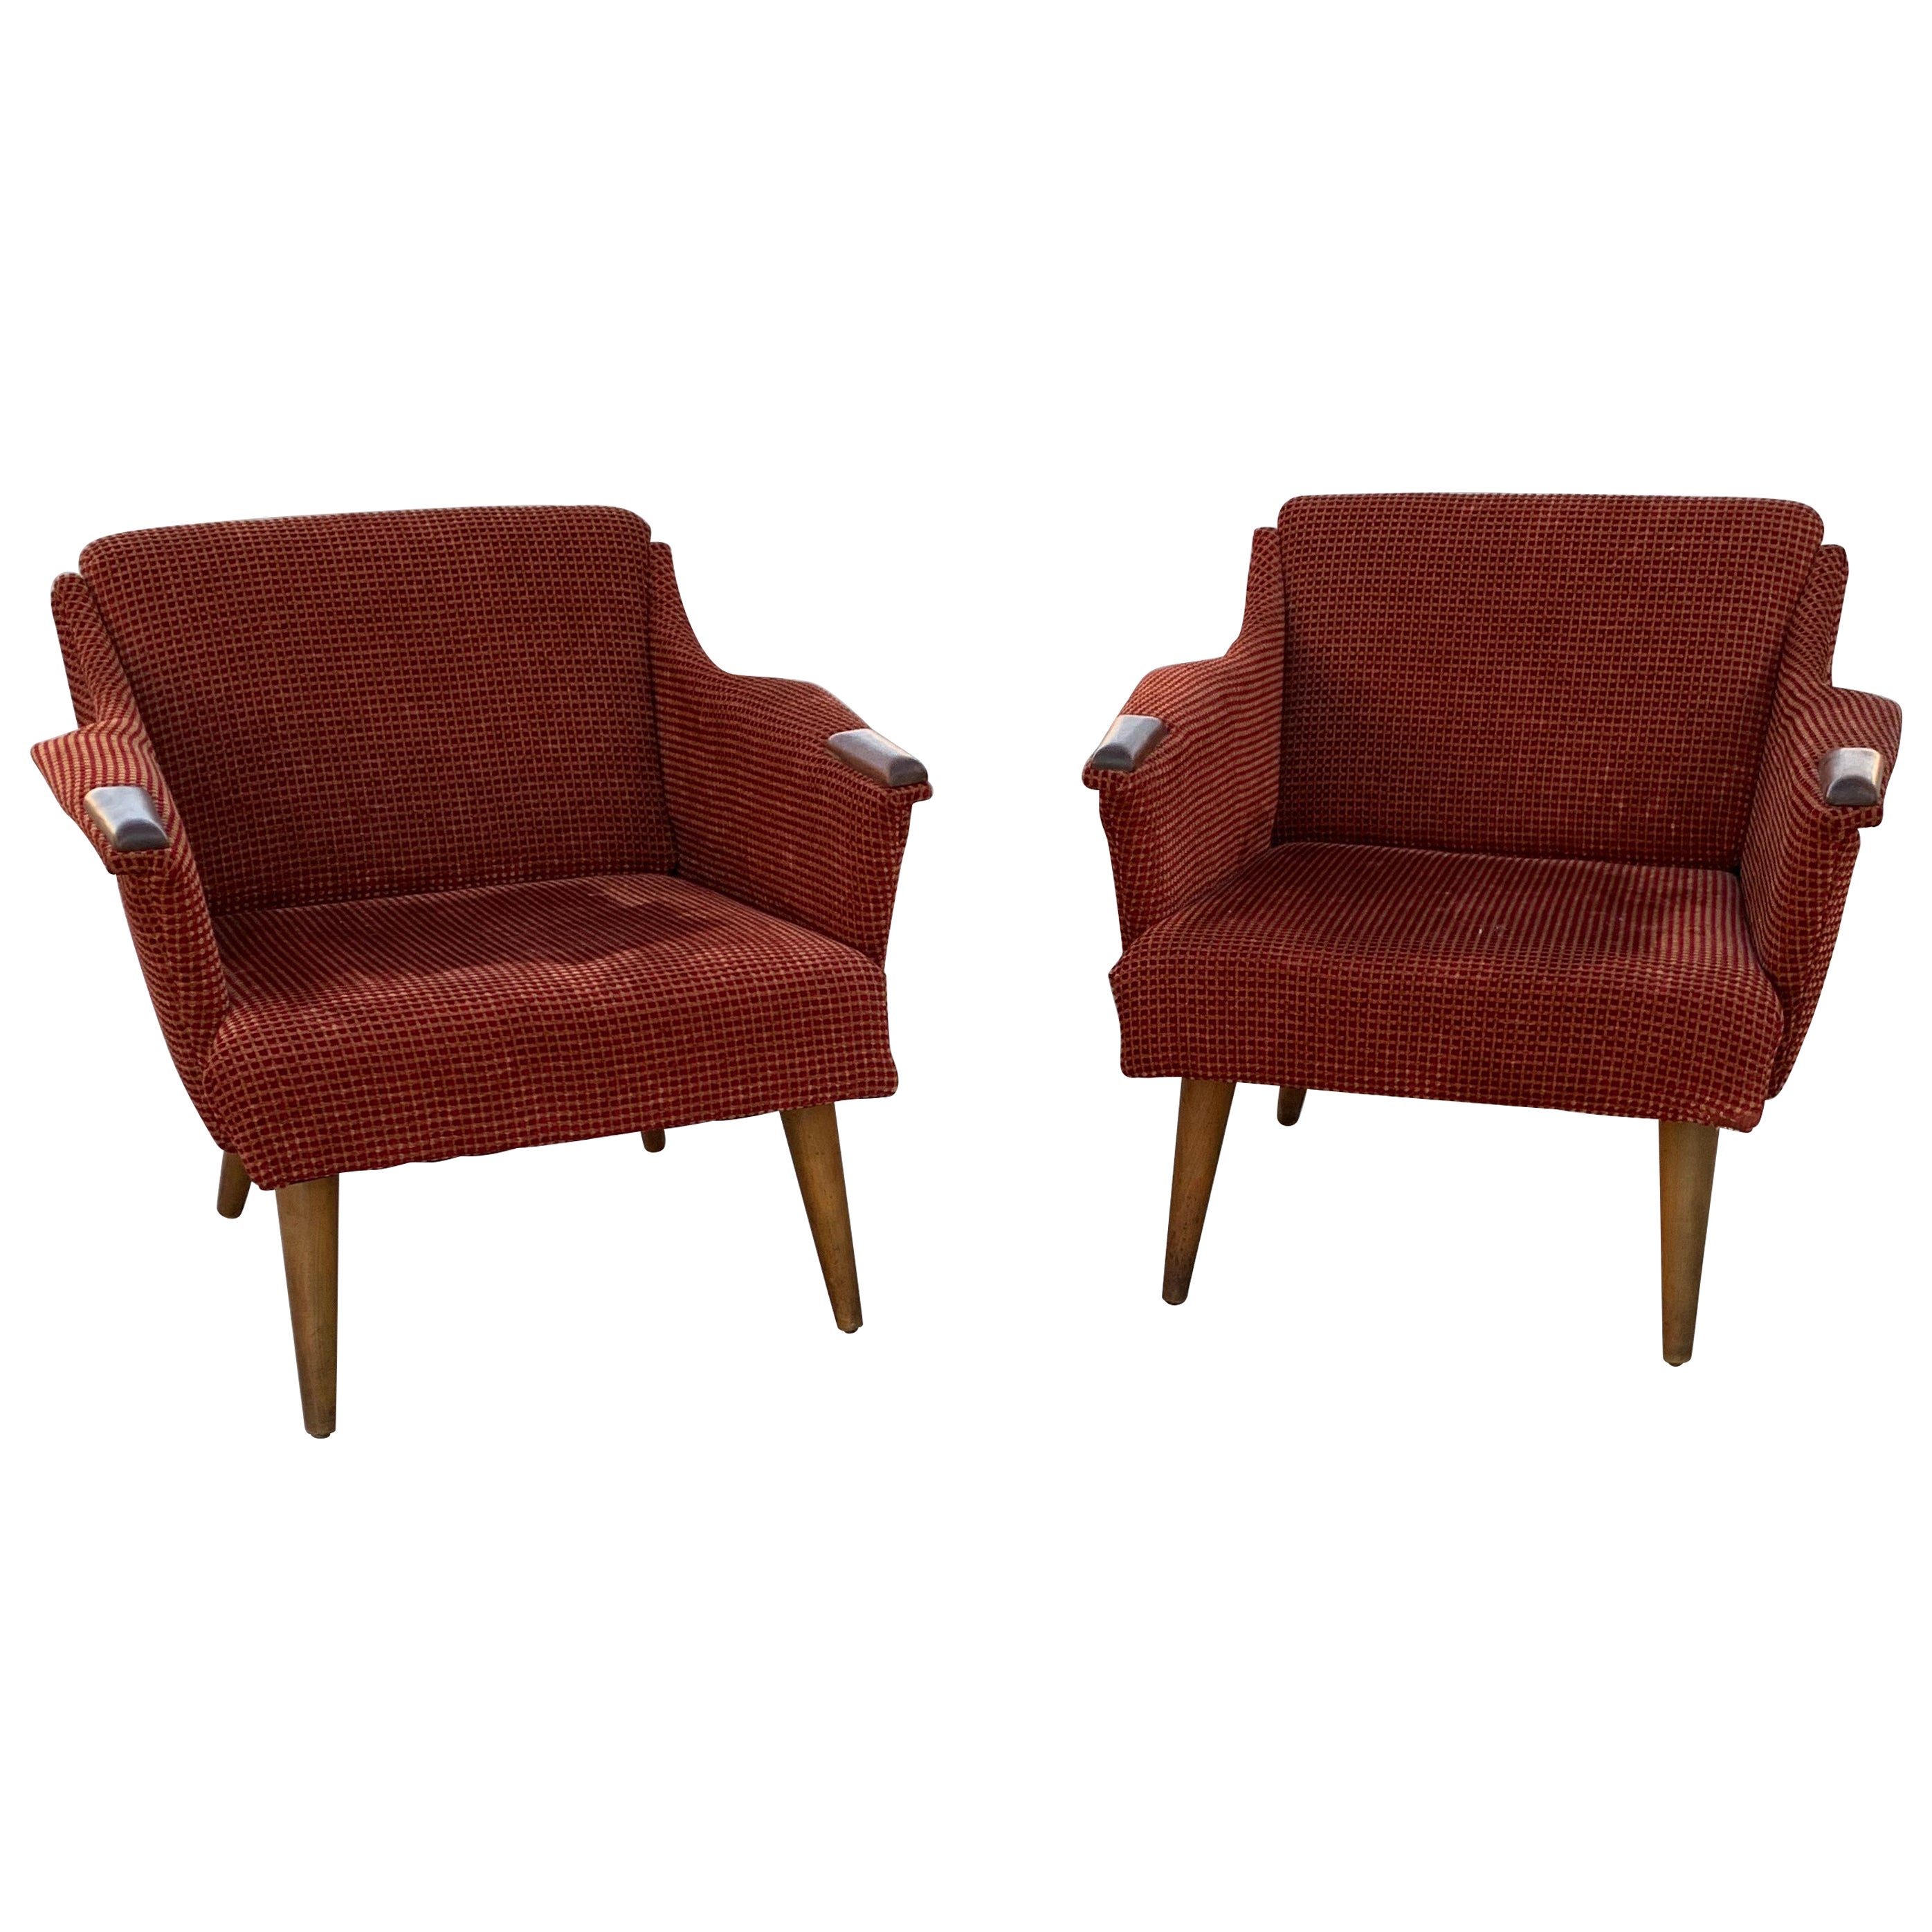 Pair of Danish Style Arm Chairs